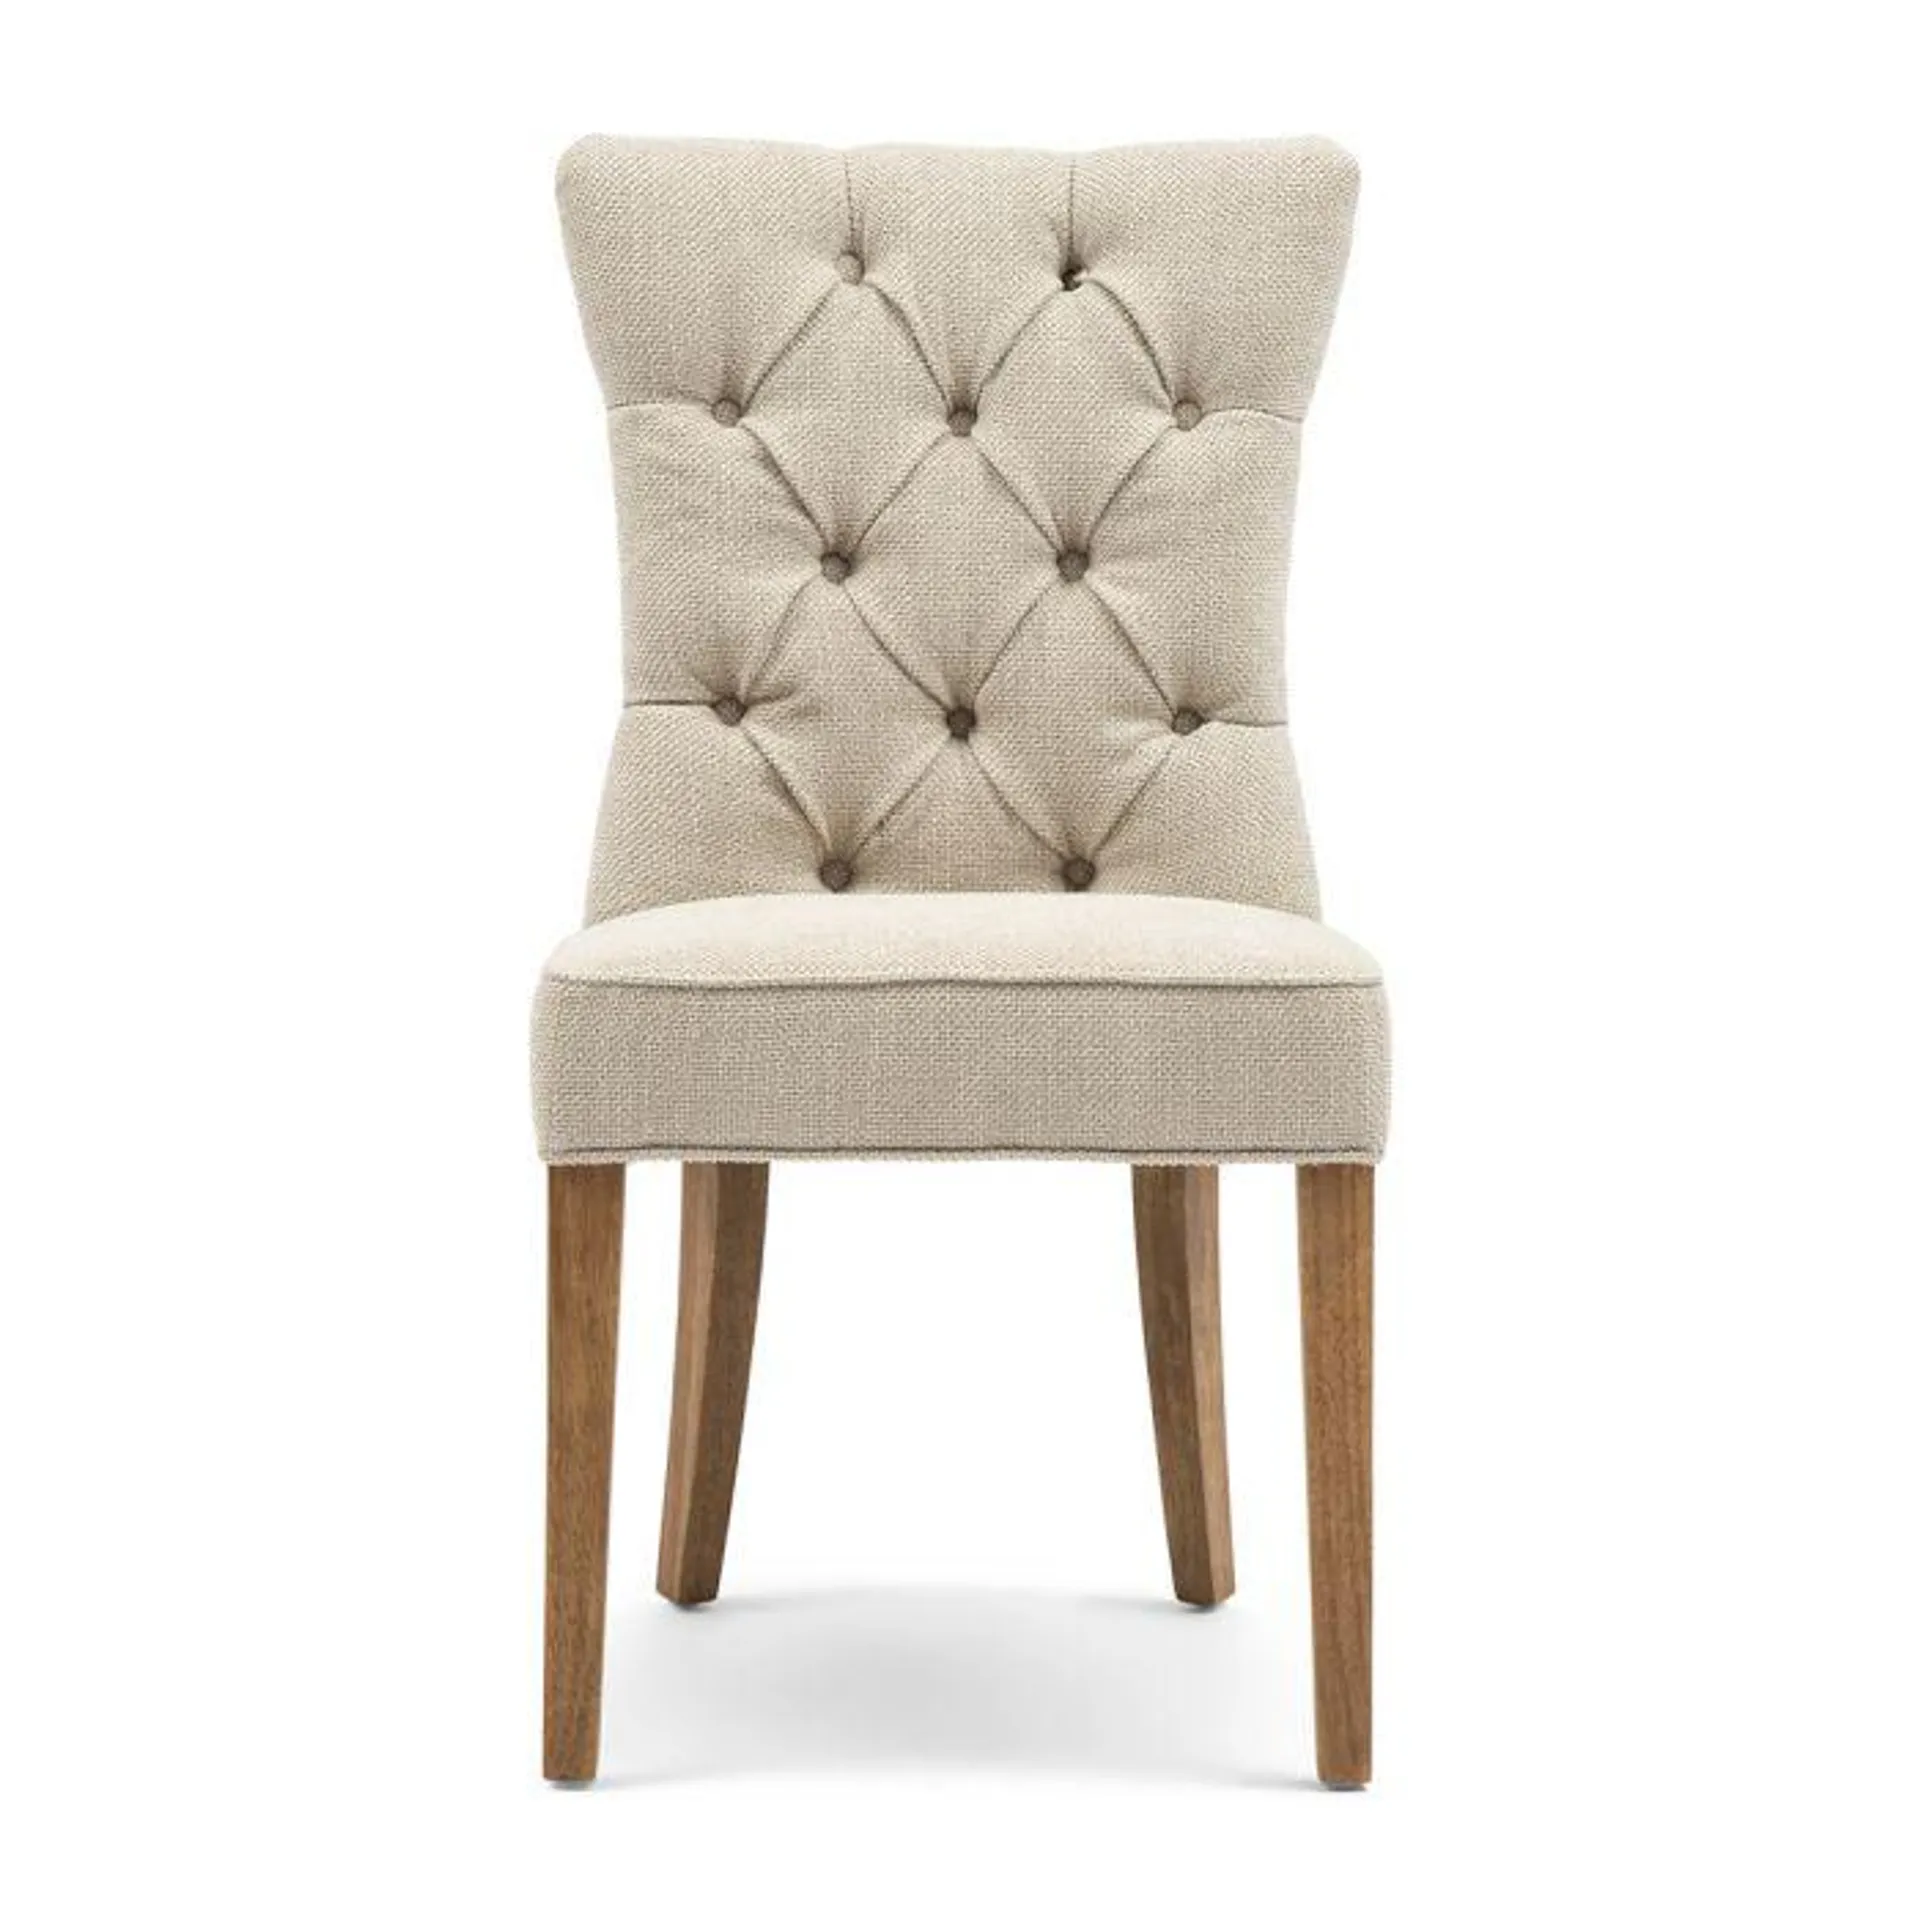 Dining Chair Balmoral, Chelsea Flax